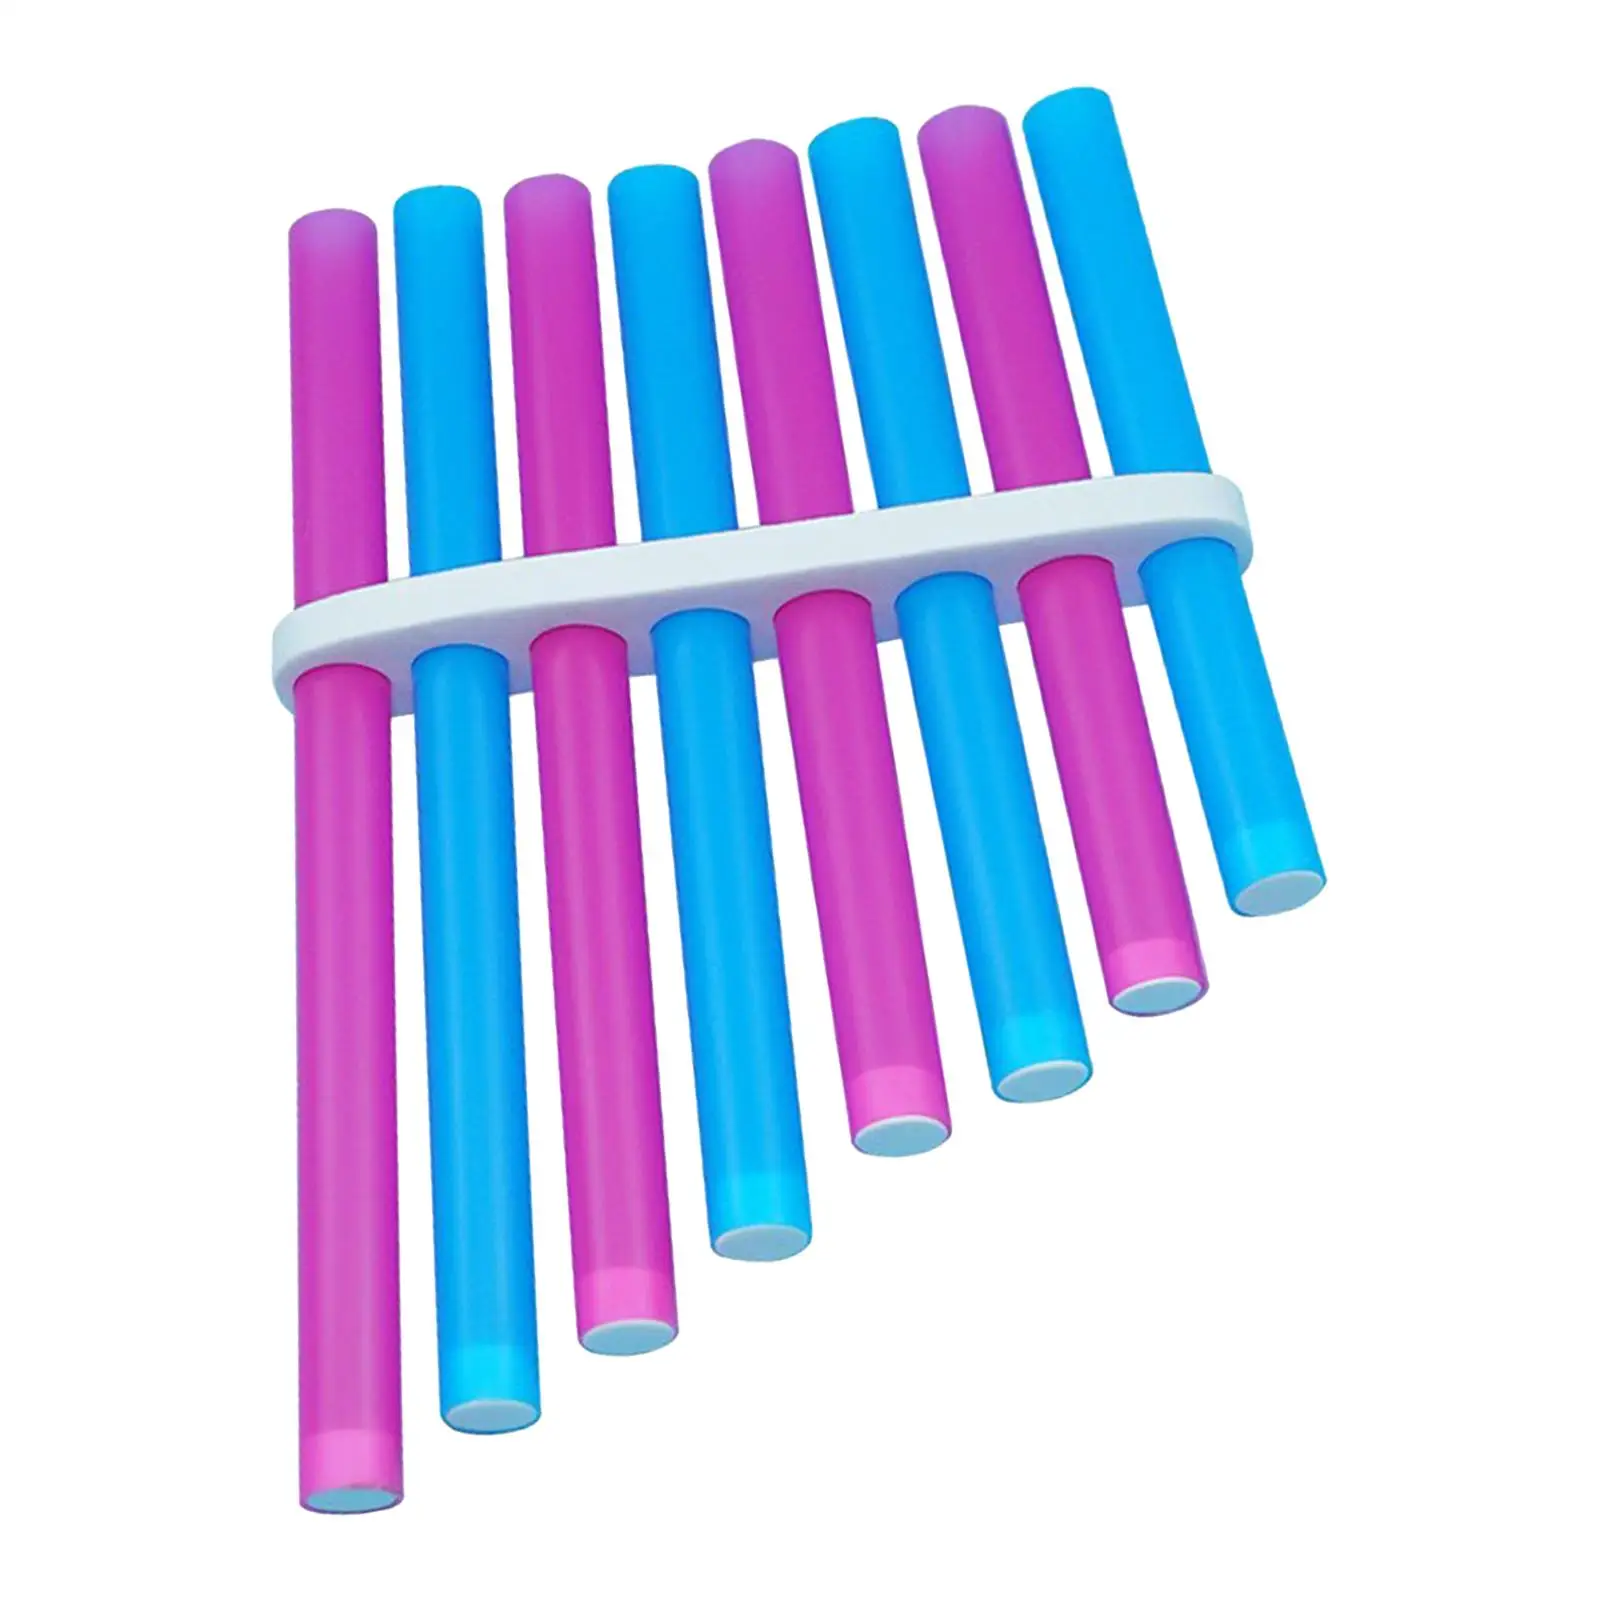 DIY Pan Flute Chinese Traditional Musical Instrument Science Experiment Building Kits for Teaching Prop Birthday Party Favor